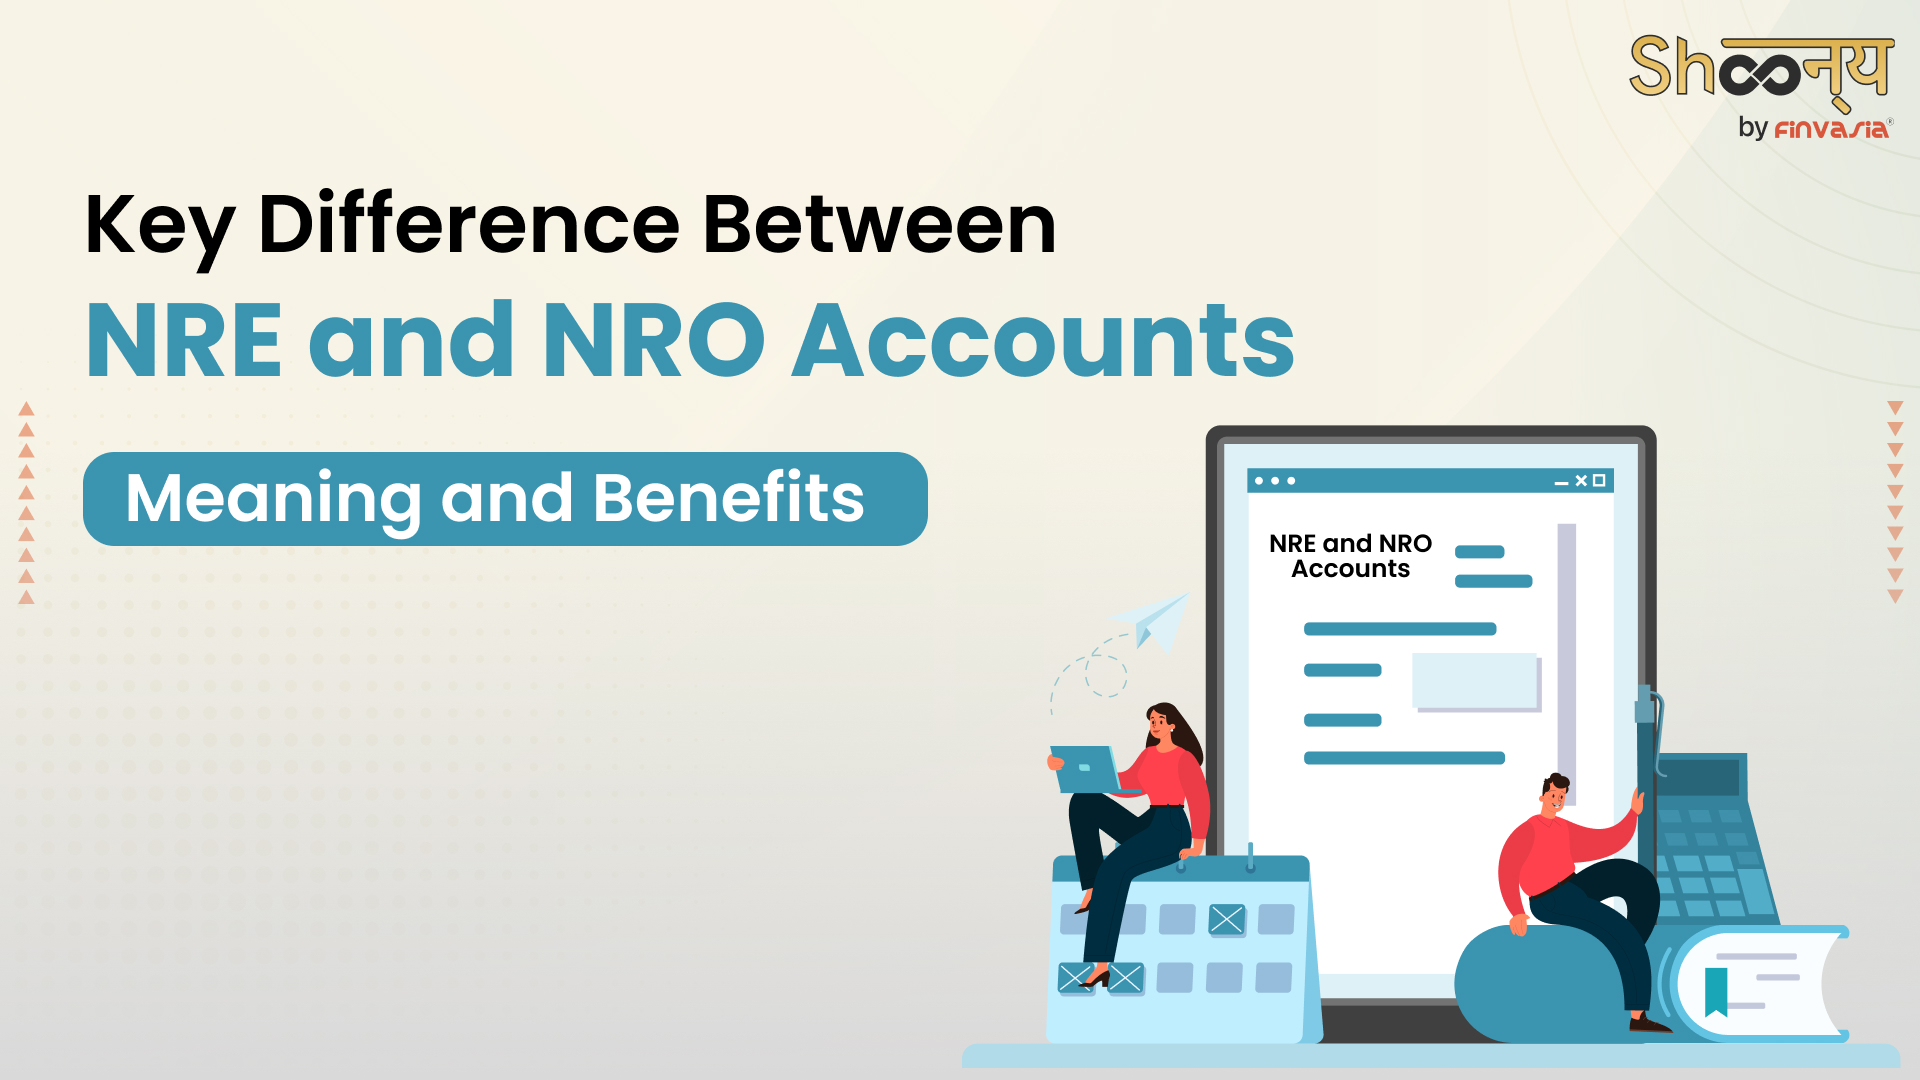 What is the Key Difference Between NRE and NRO Account?